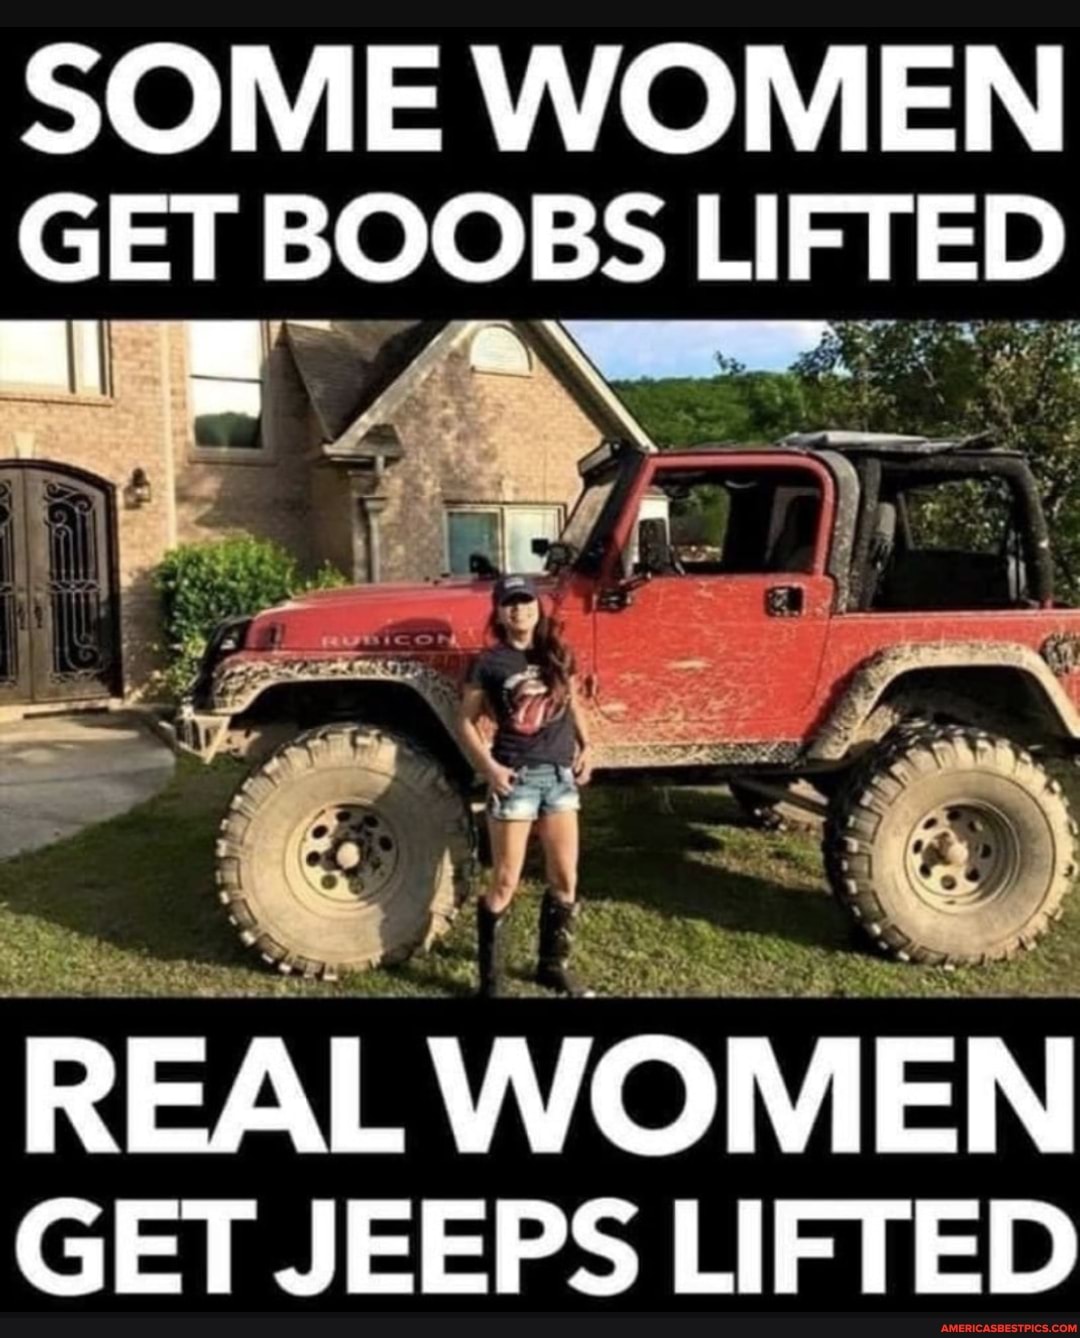 abby person add tits and jeeps photo